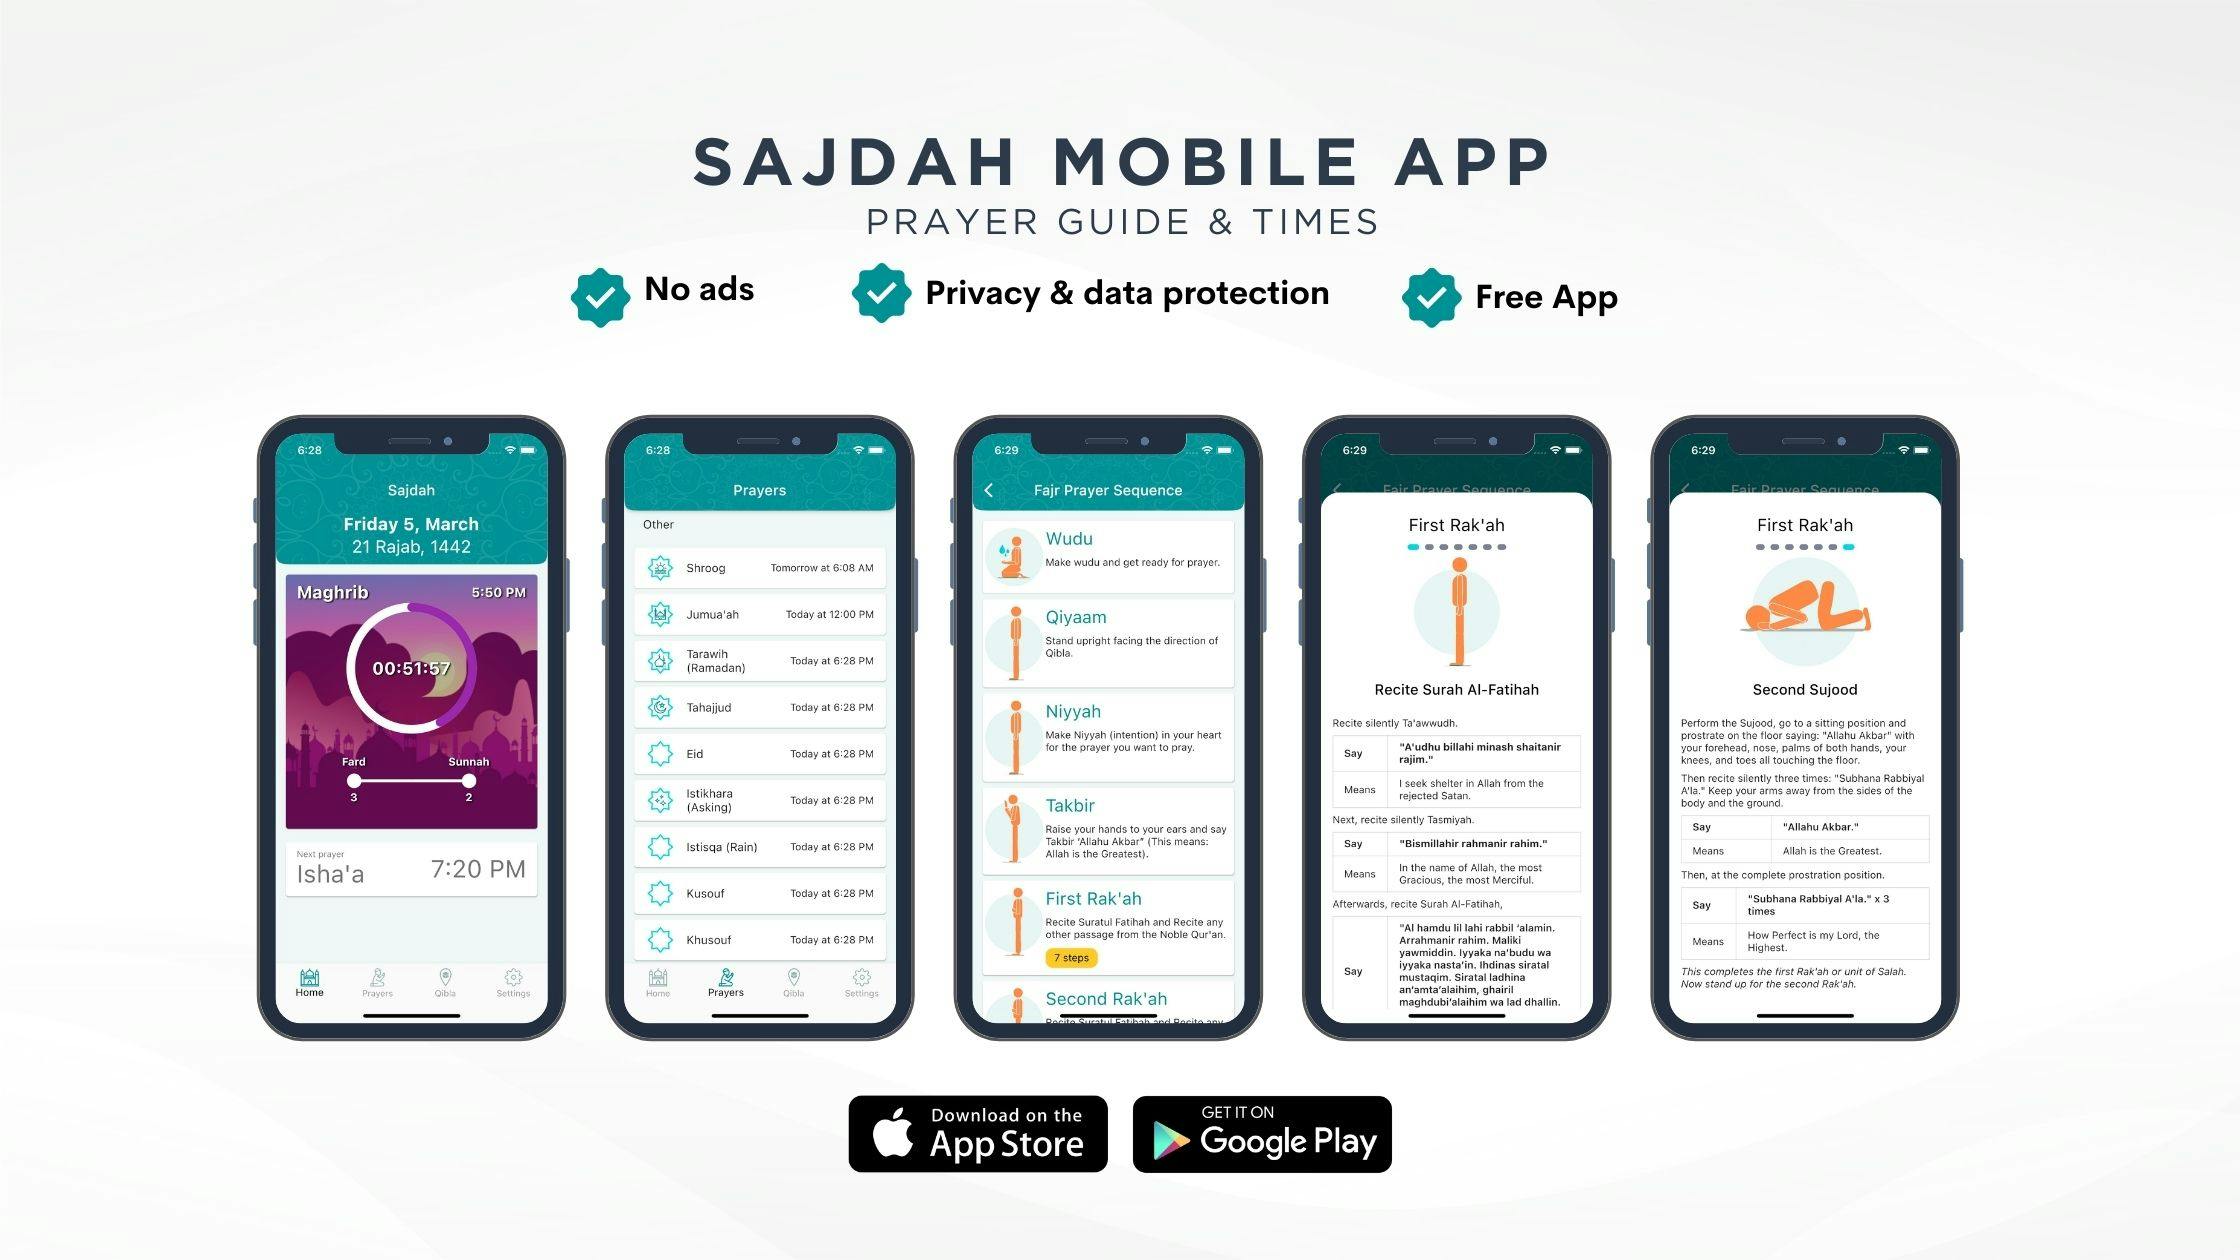 sajdah-mobile-app--prayer-guide-and-times-for-every-muslim